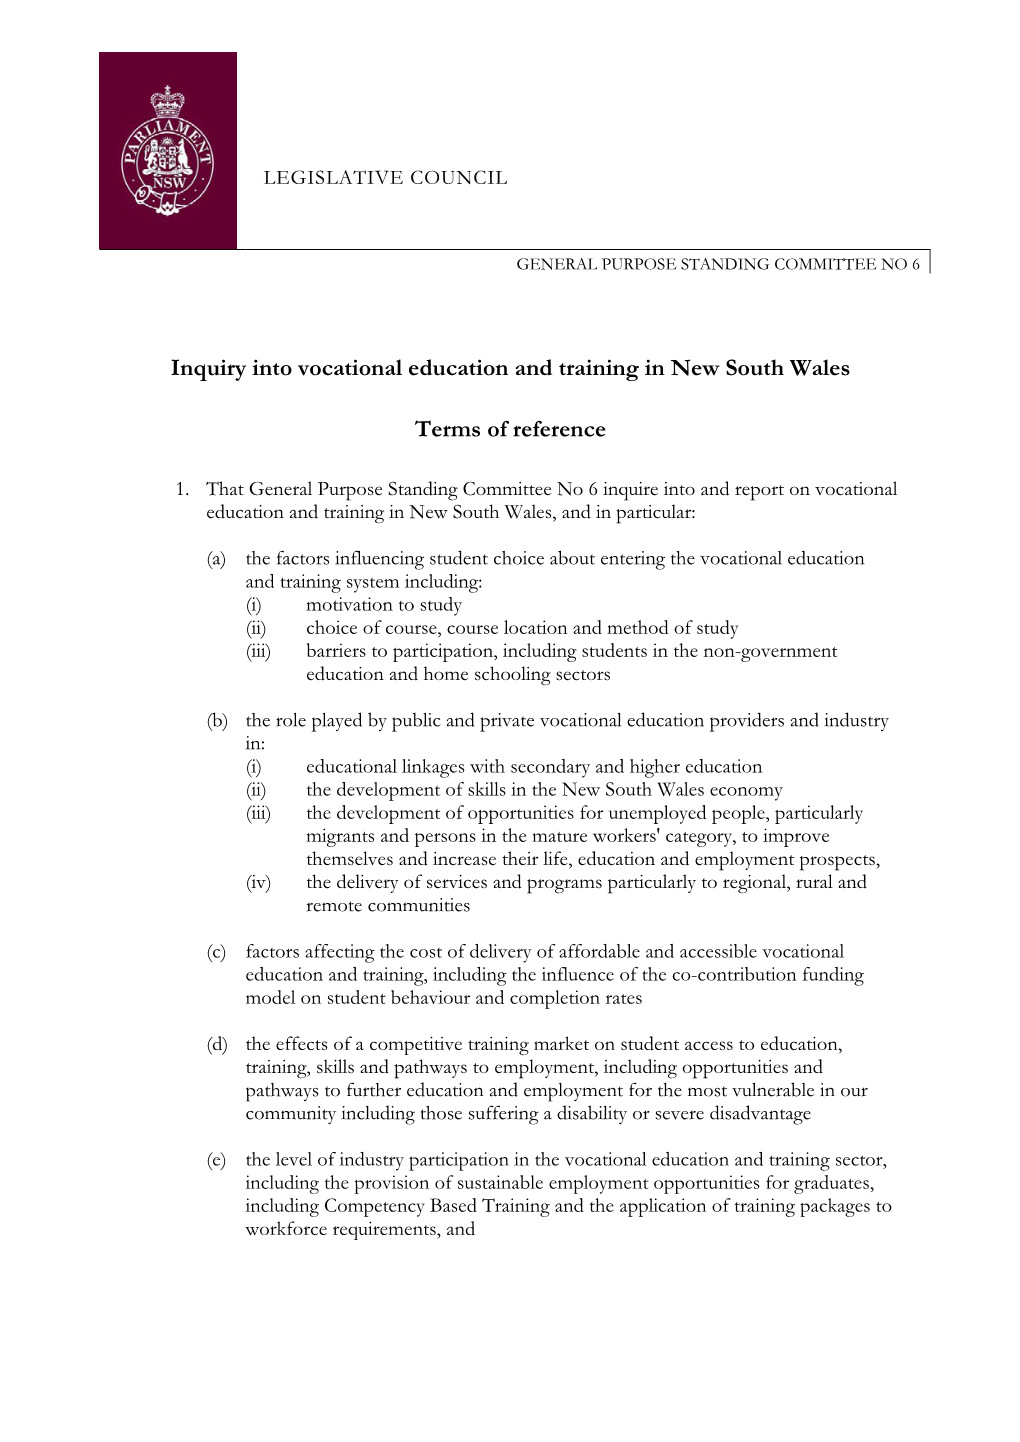 Inquiry Into Vocational Education and Training in New South Wales Terms